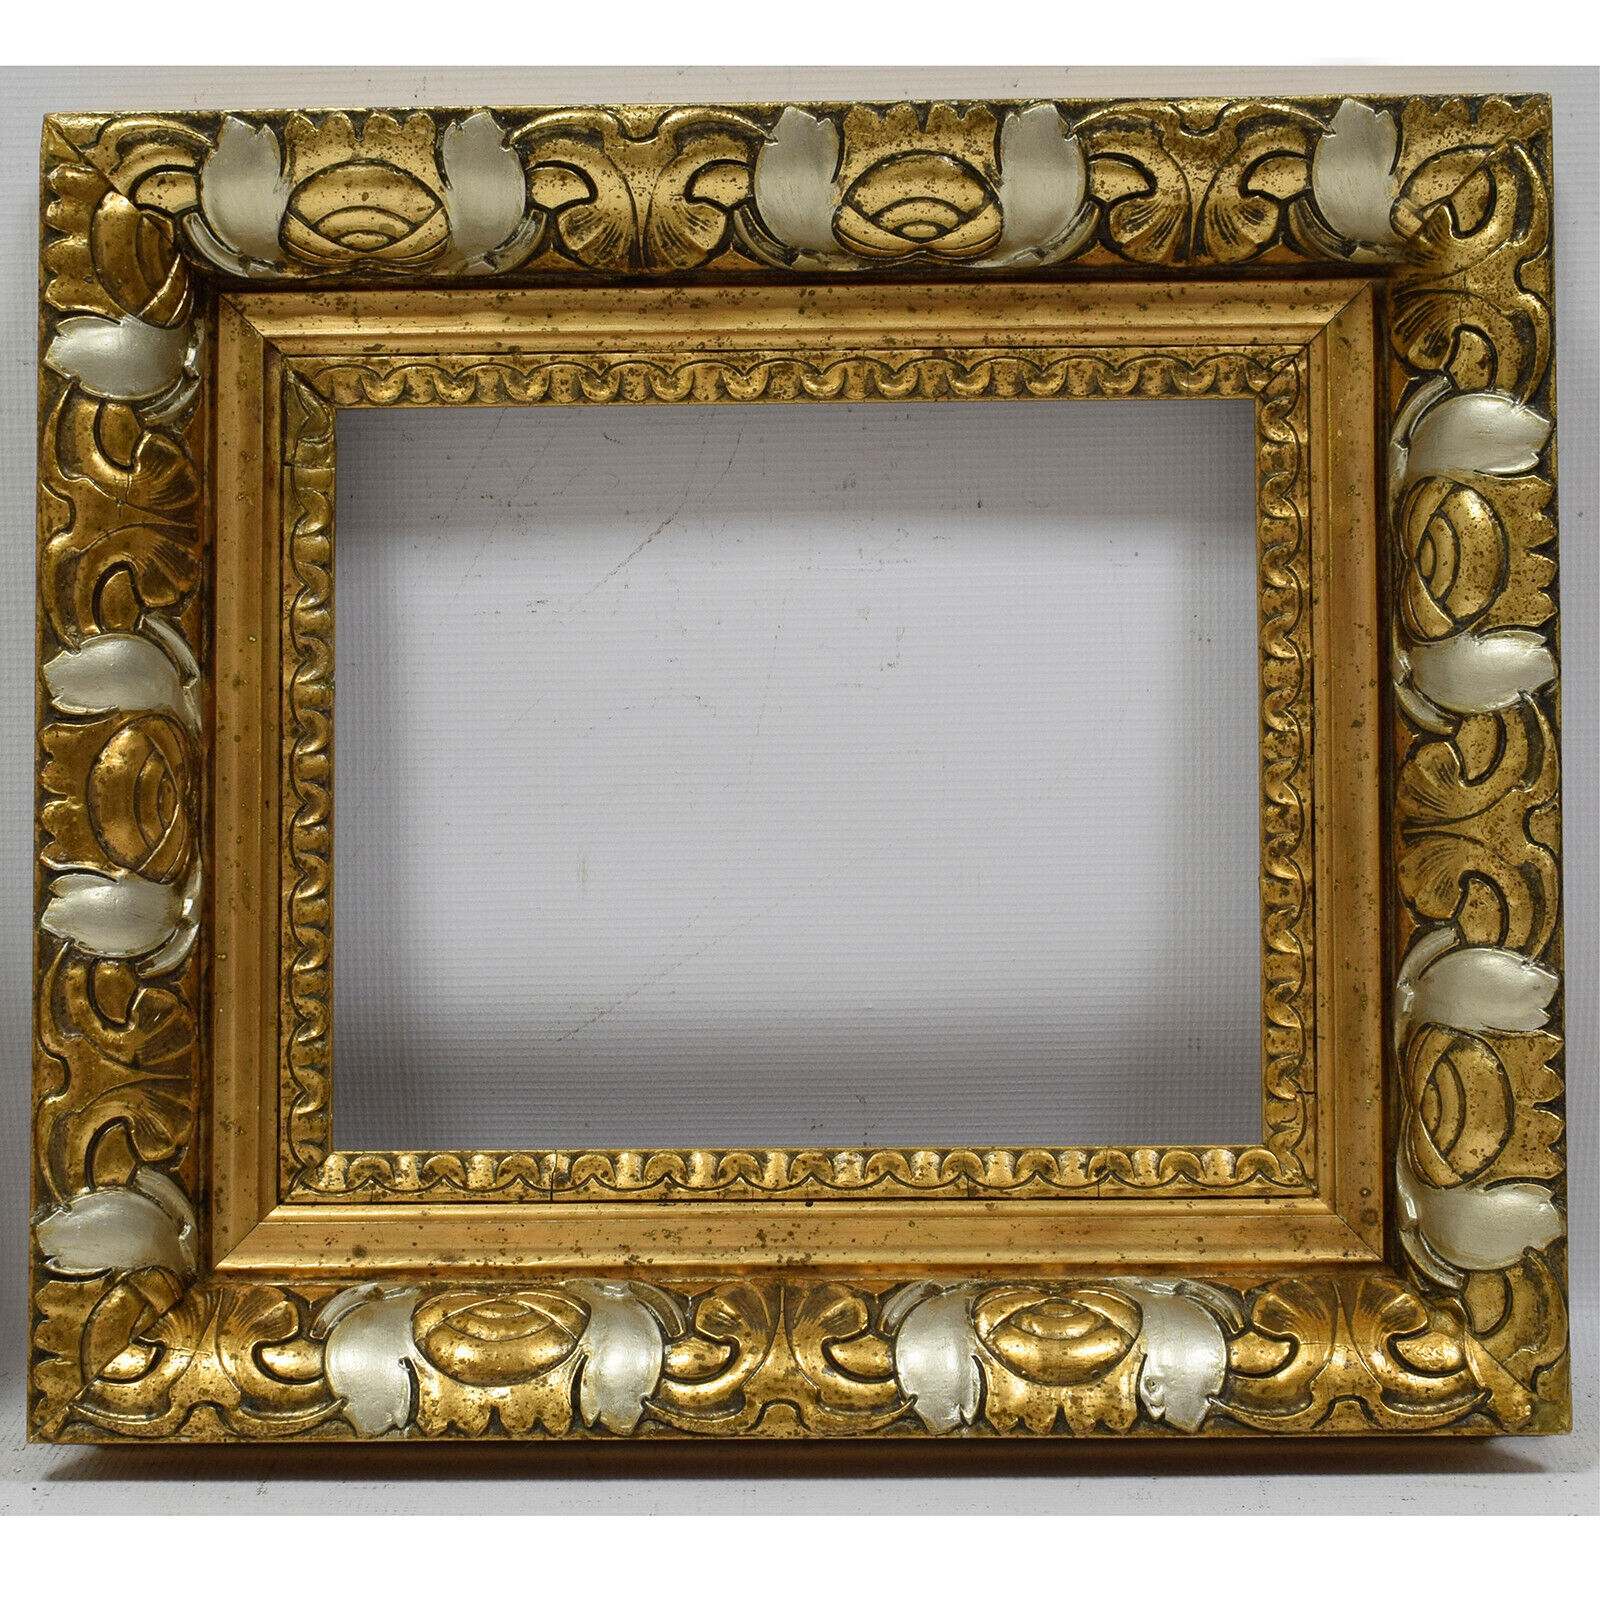 Ca. 1900 Old wooden frame decorative Original condition Internal: 12x10 in